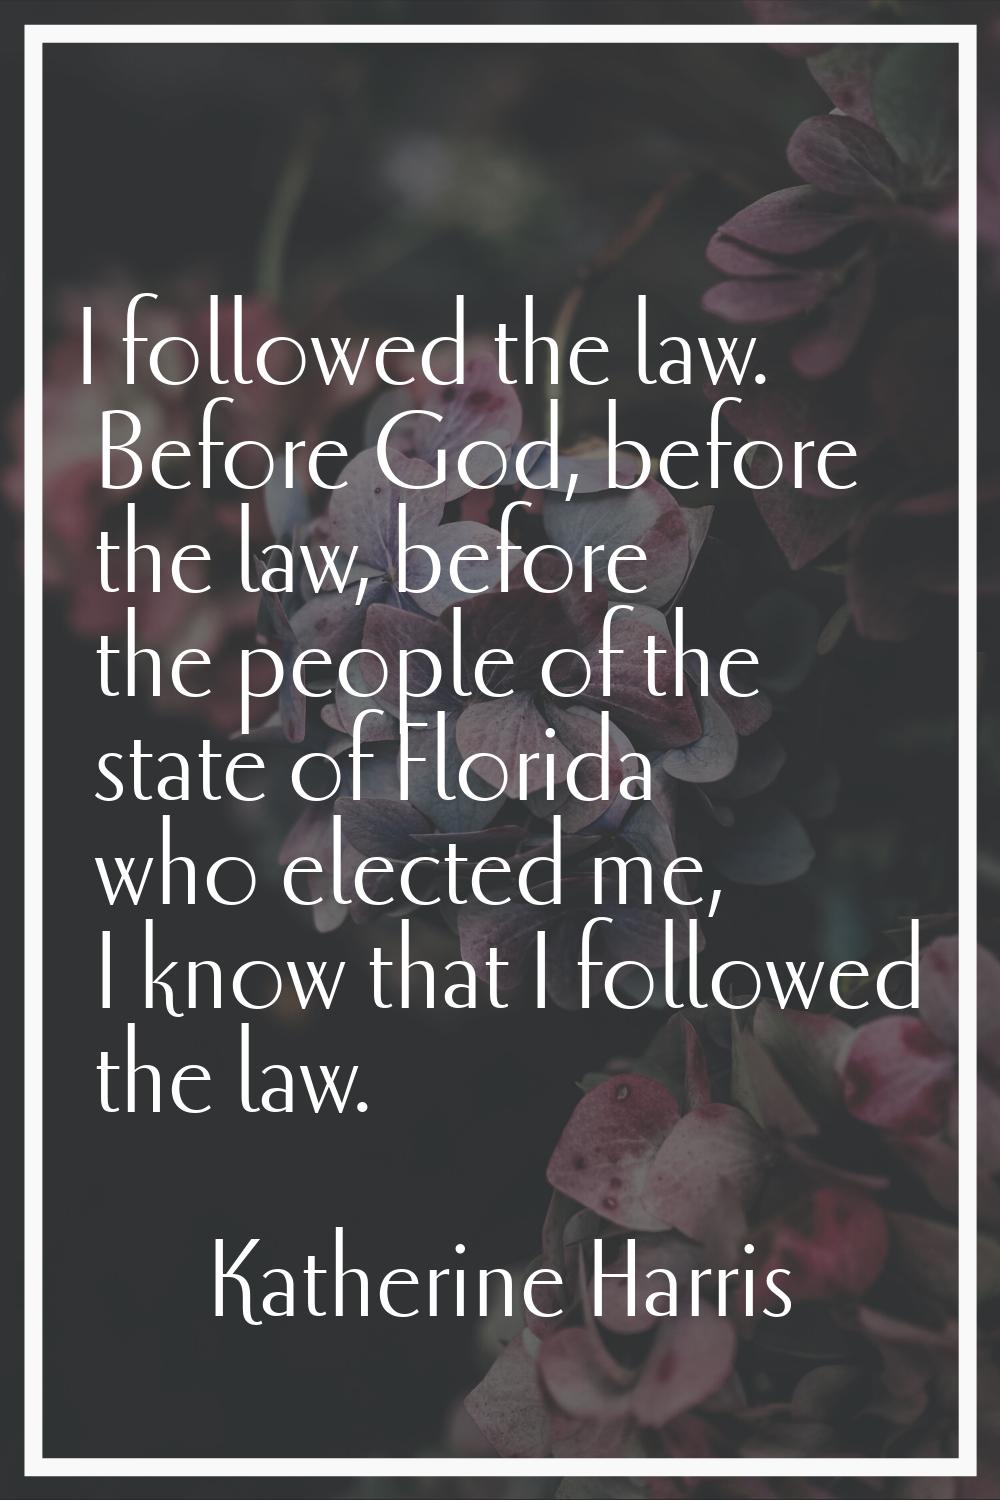 I followed the law. Before God, before the law, before the people of the state of Florida who elect